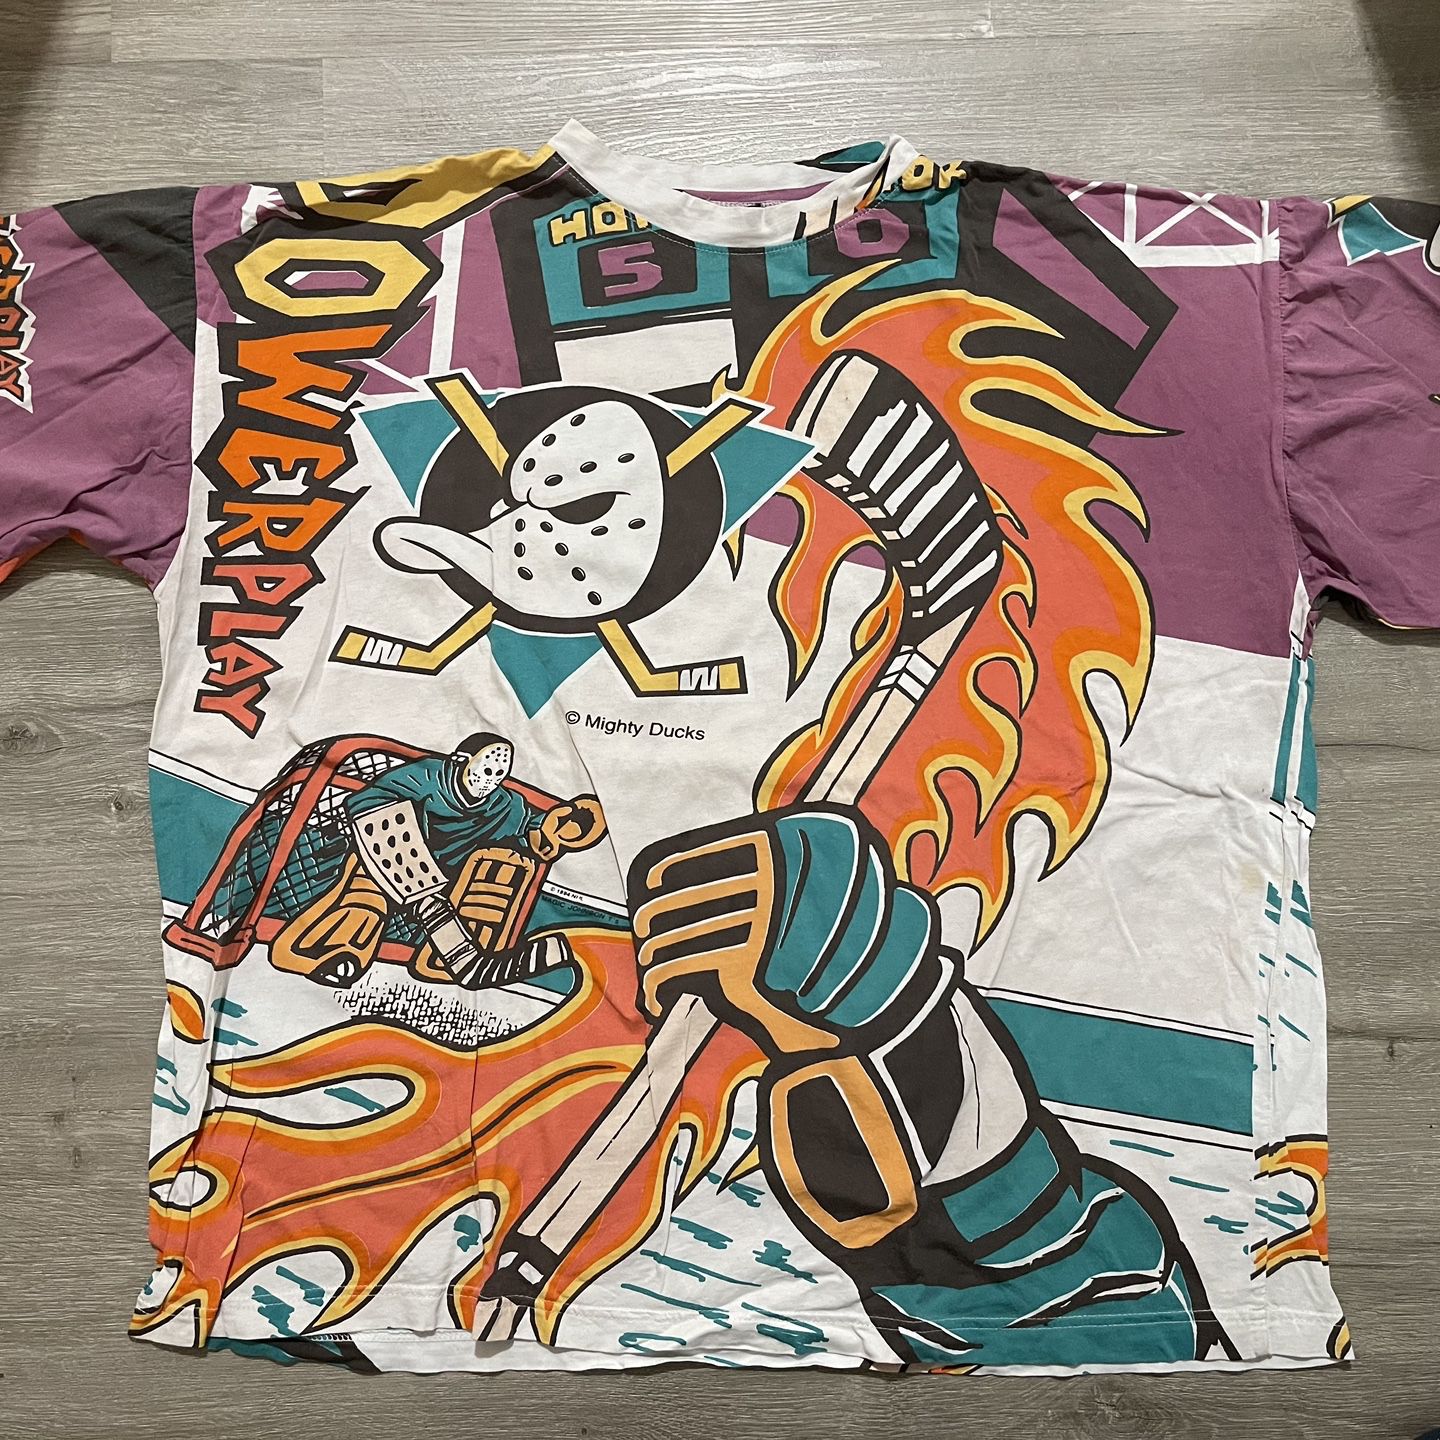 Anaheim Ducks Jersey - clothing & accessories - by owner - apparel